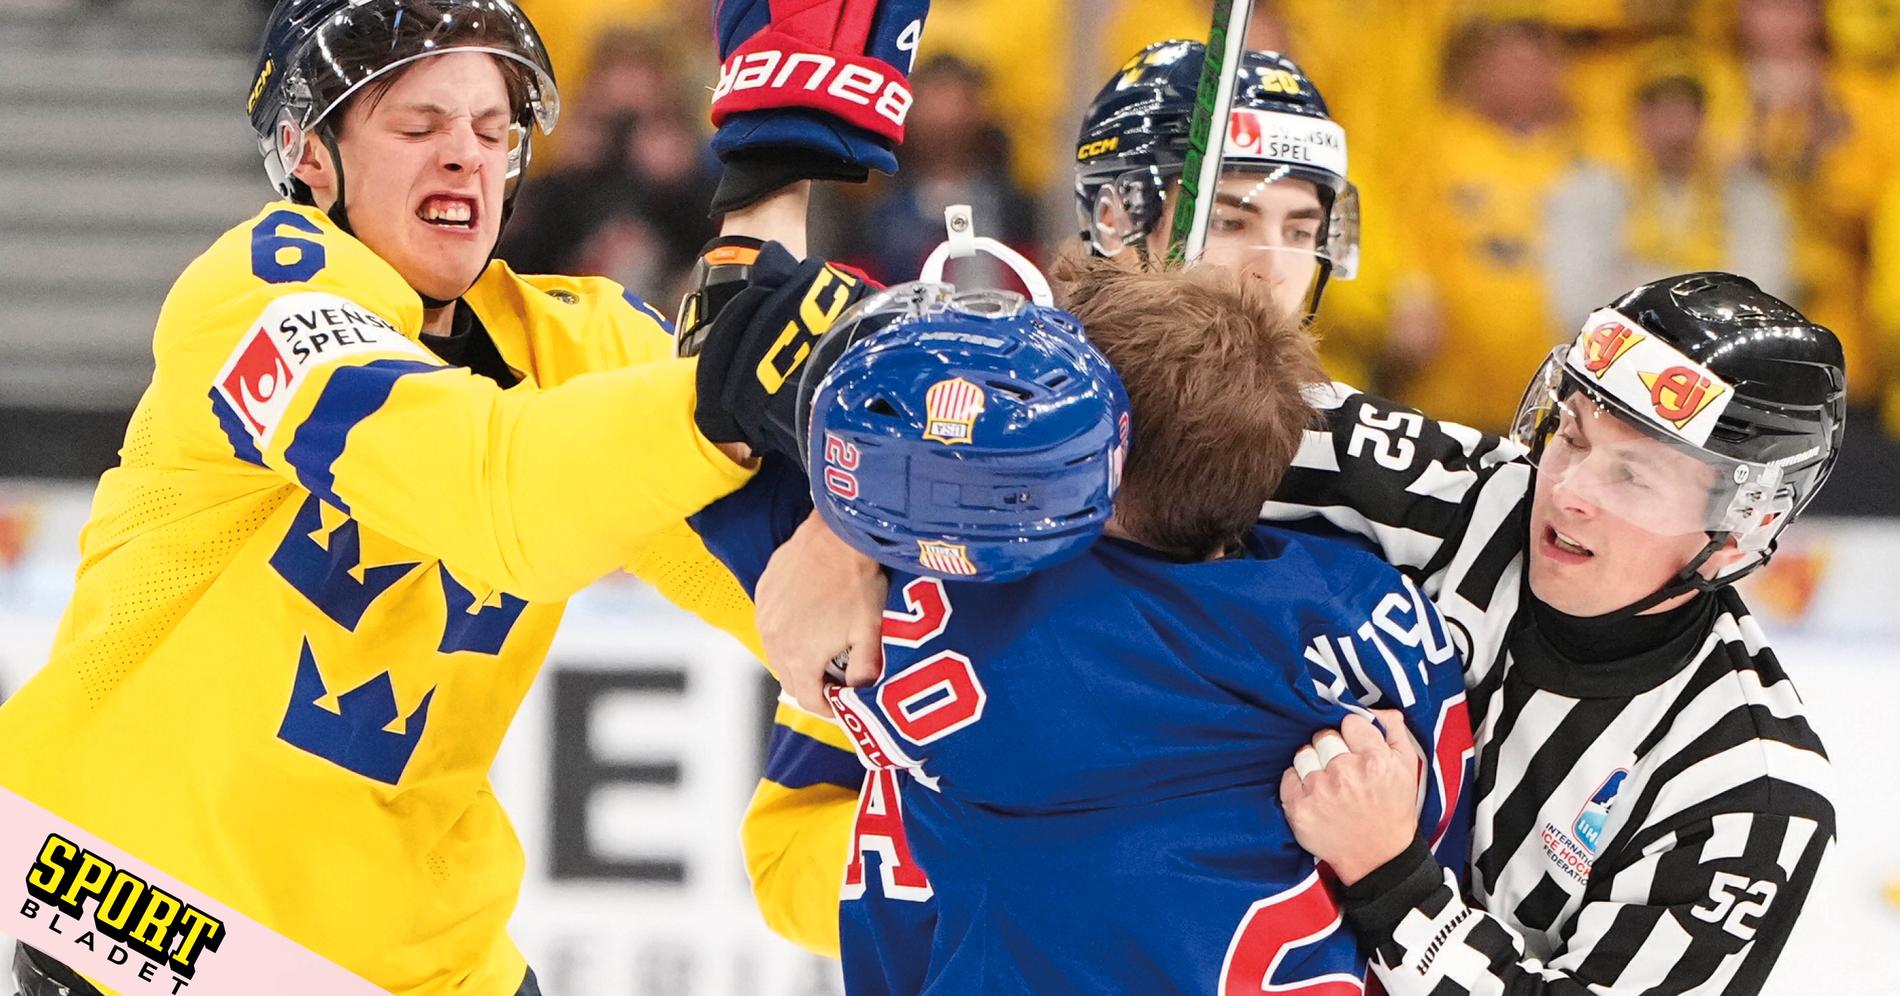 Anton Johansson Causes Controversy in JVM Final with Fight and Match Penalty